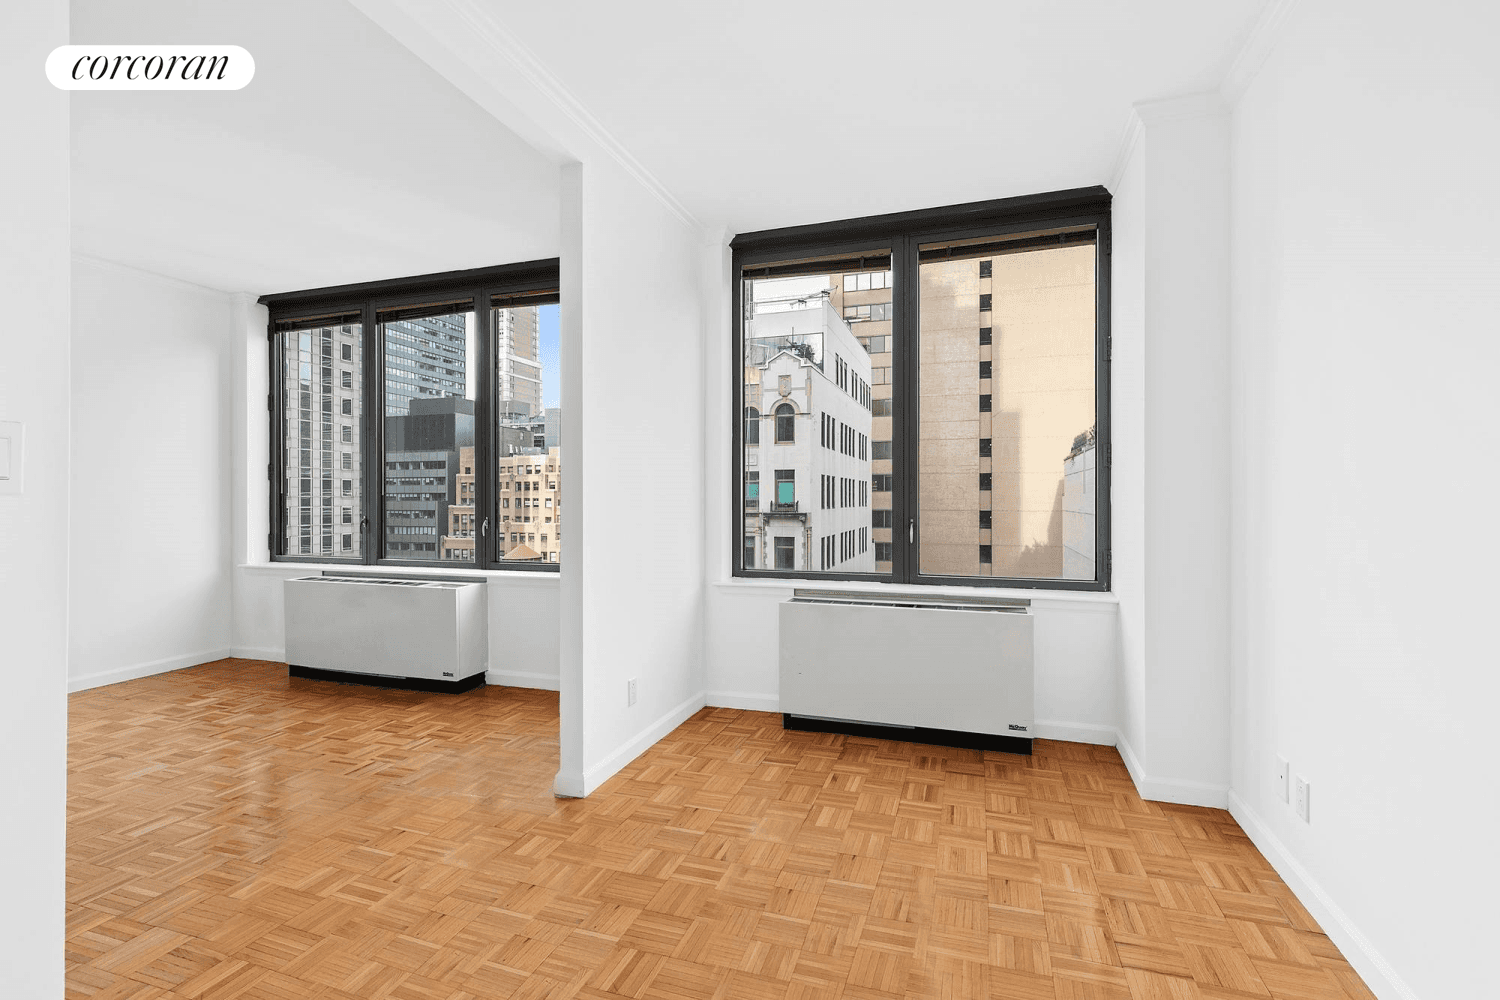 This high floor alcove studio has stunning views and great closet space.